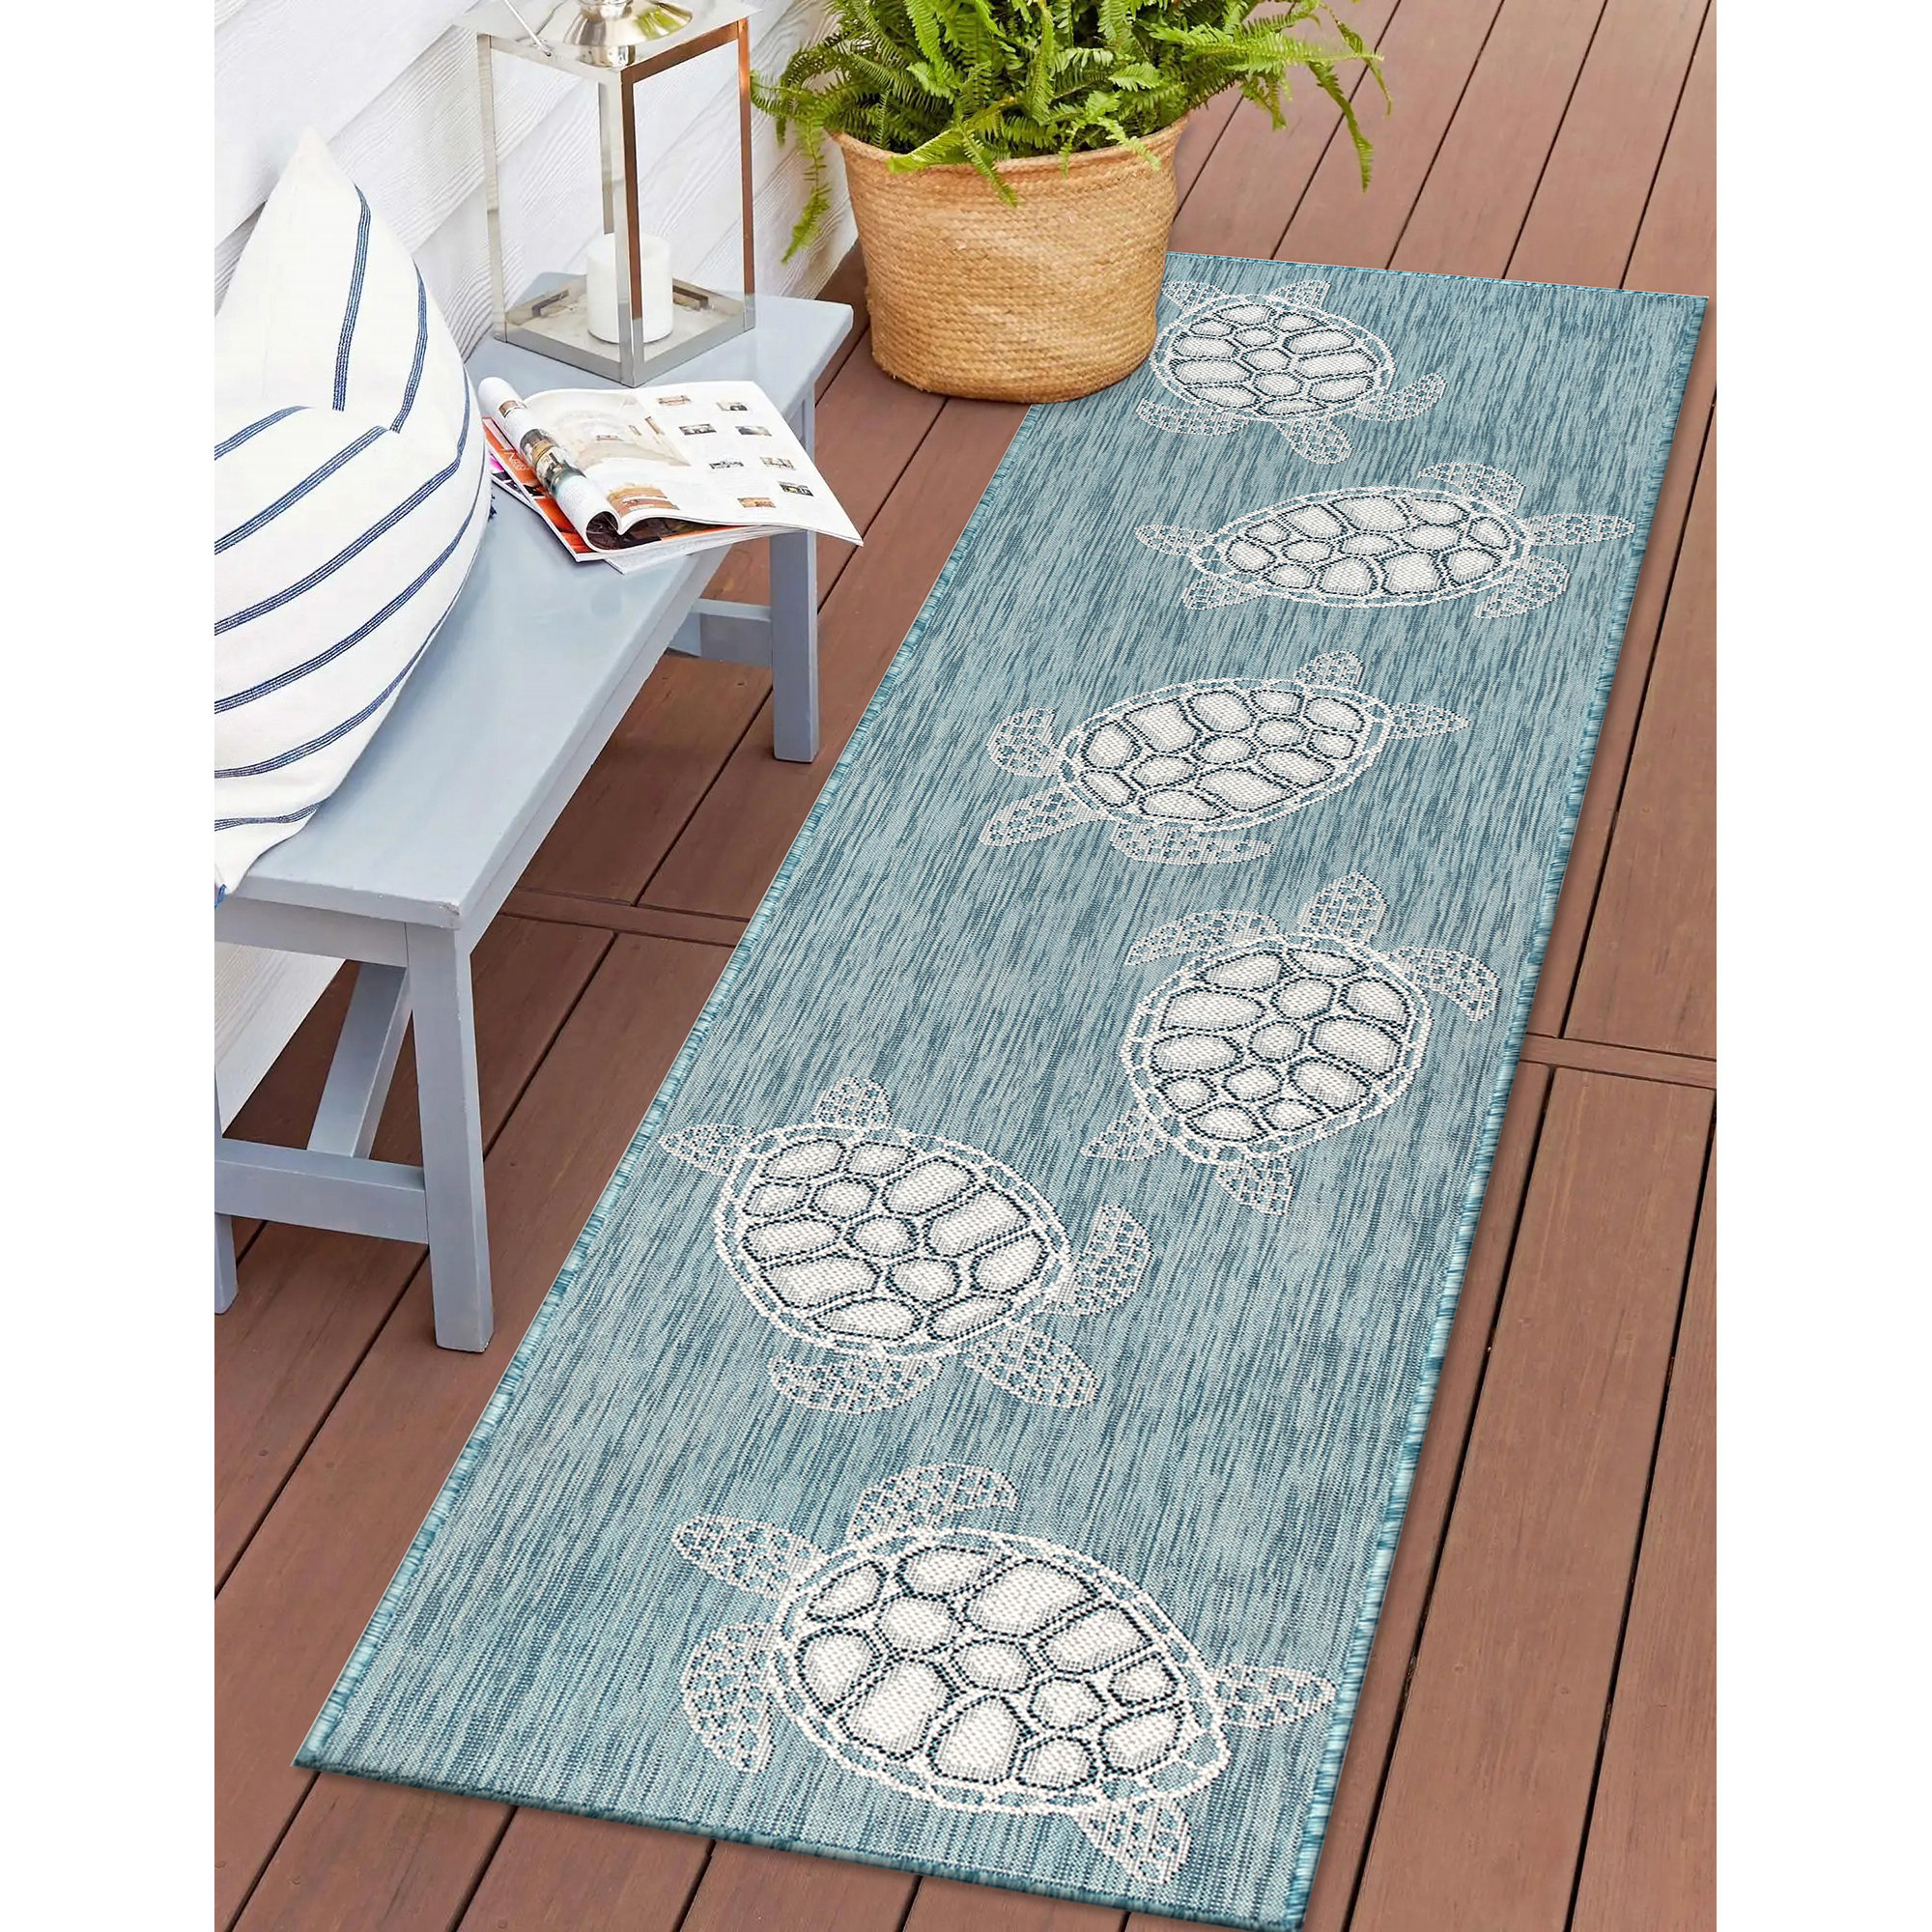 Wheatley Synthetic Rug with Anti-Slip Backing